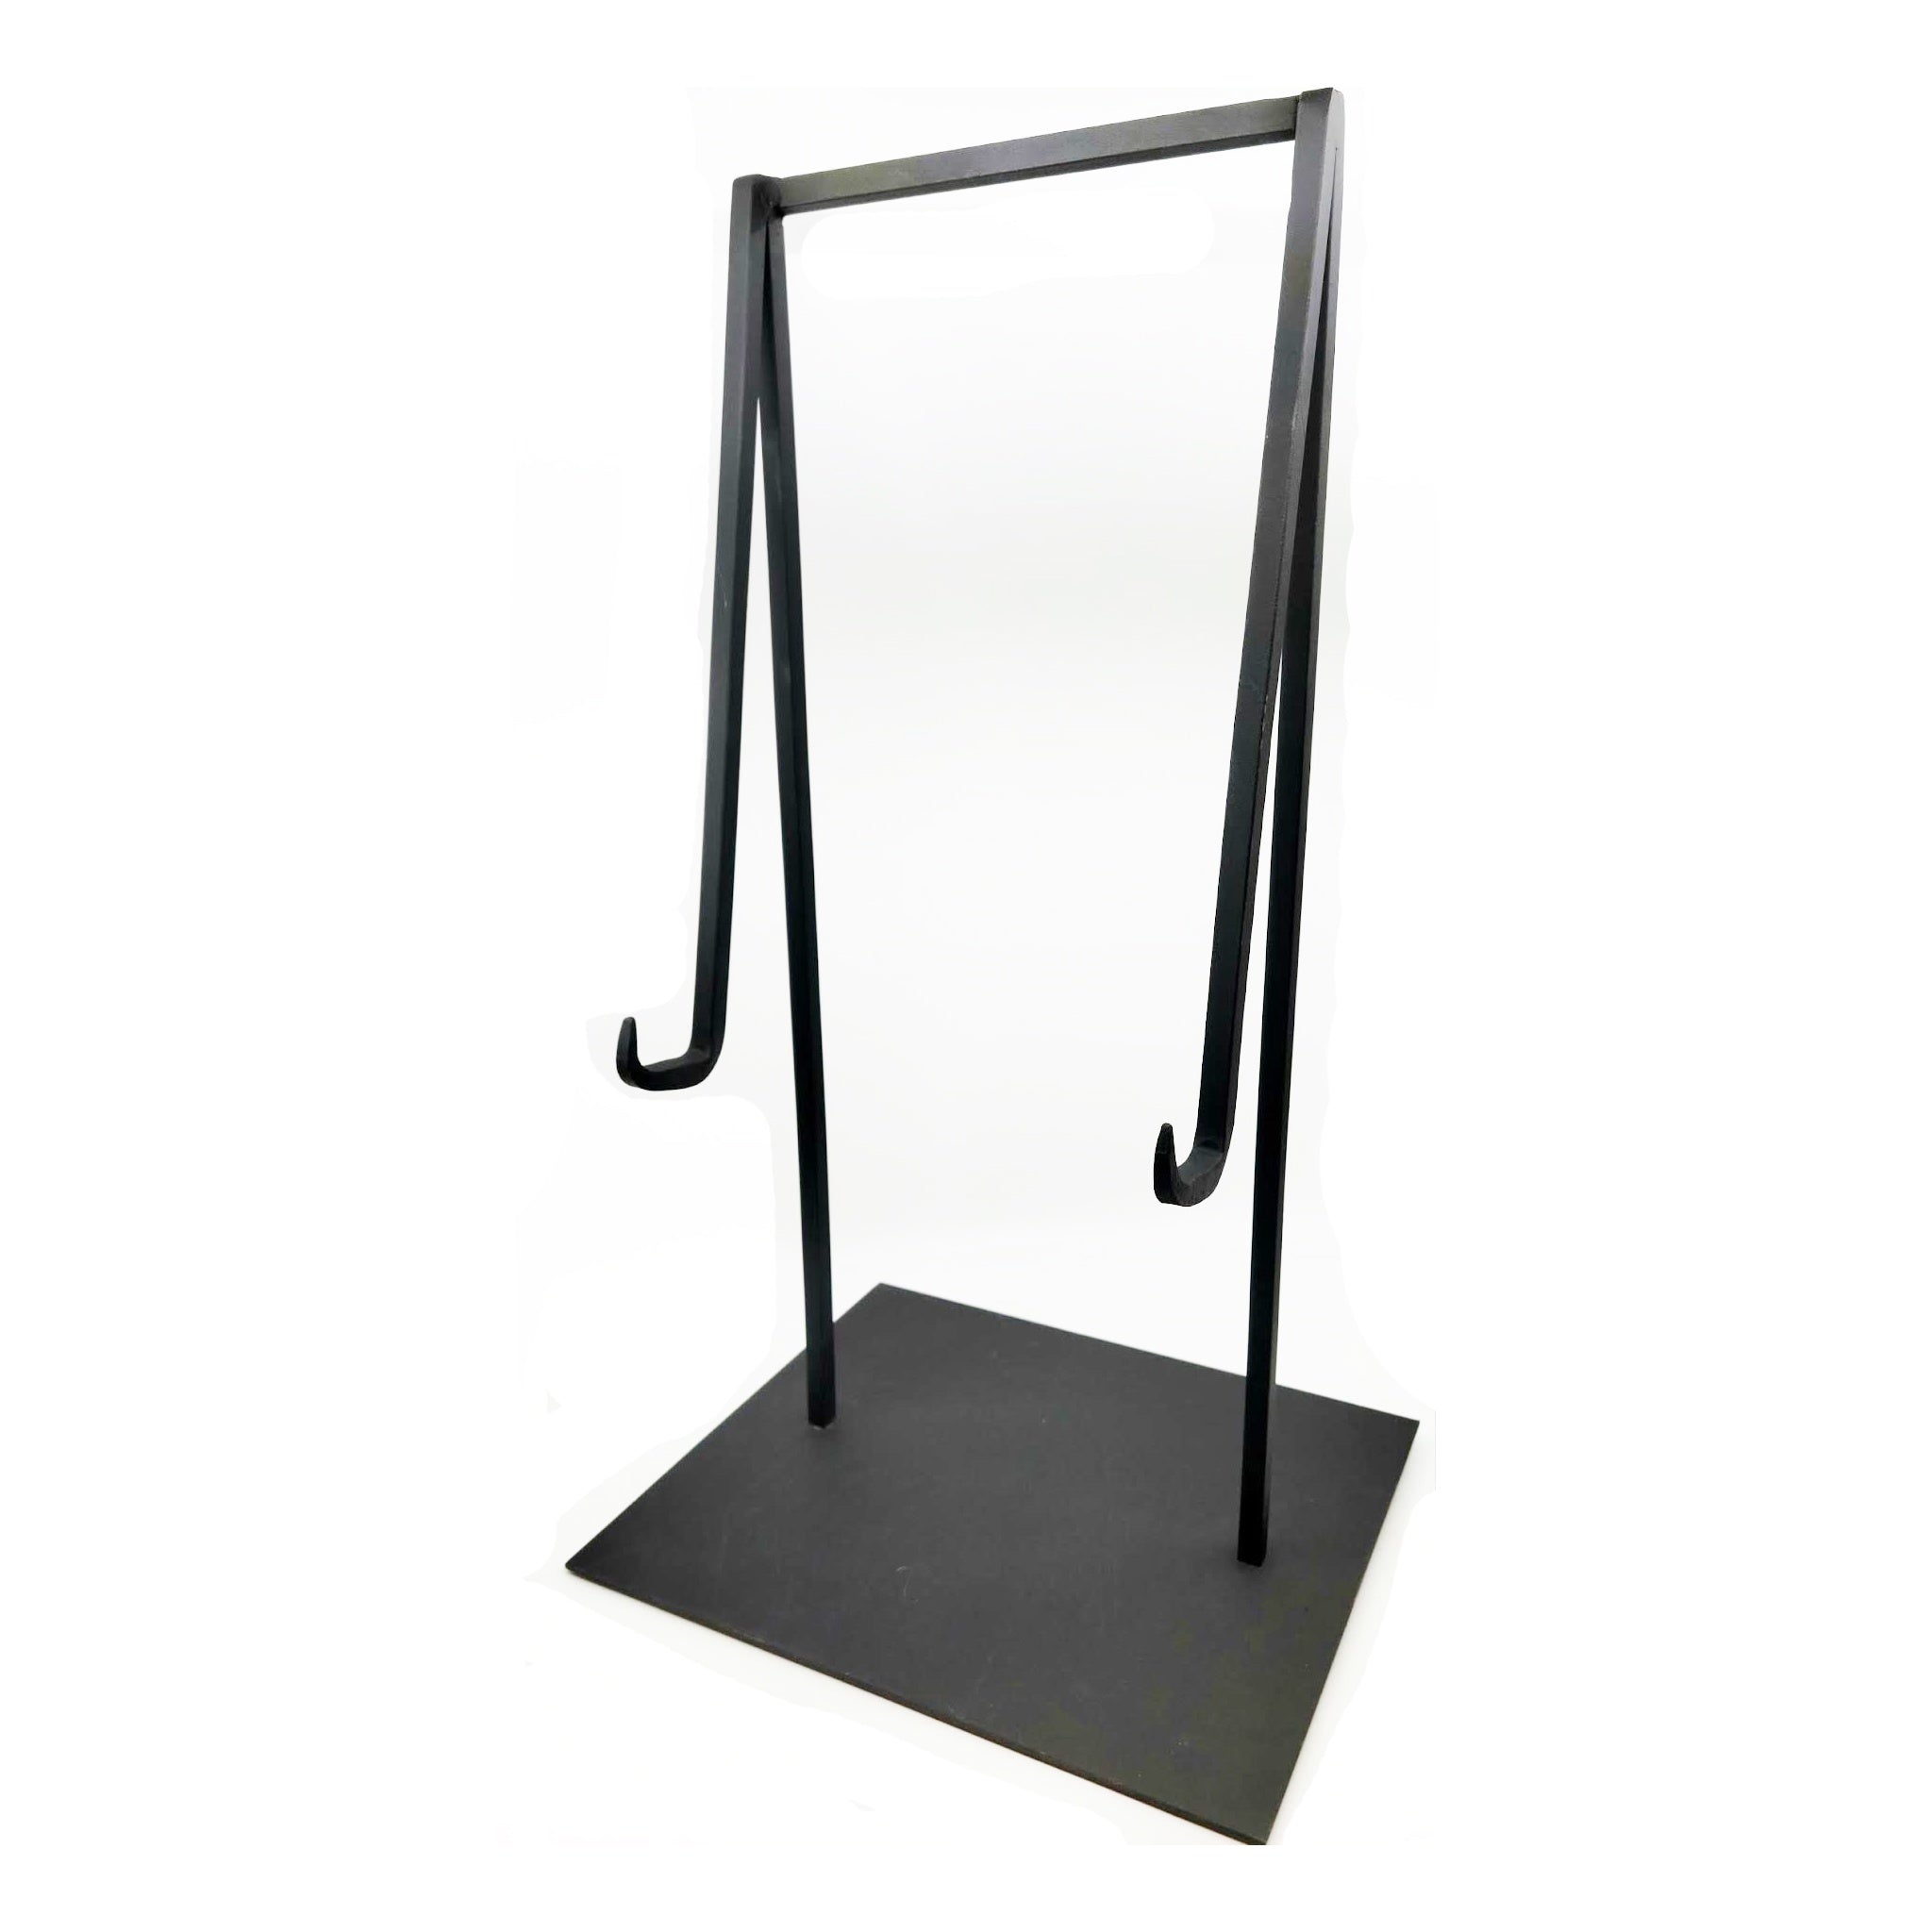 Forbes Industries 6811 Floor Easel w/ Adjustable Ledge - 24W x 20D x 66  1/2H, Brushed Brass